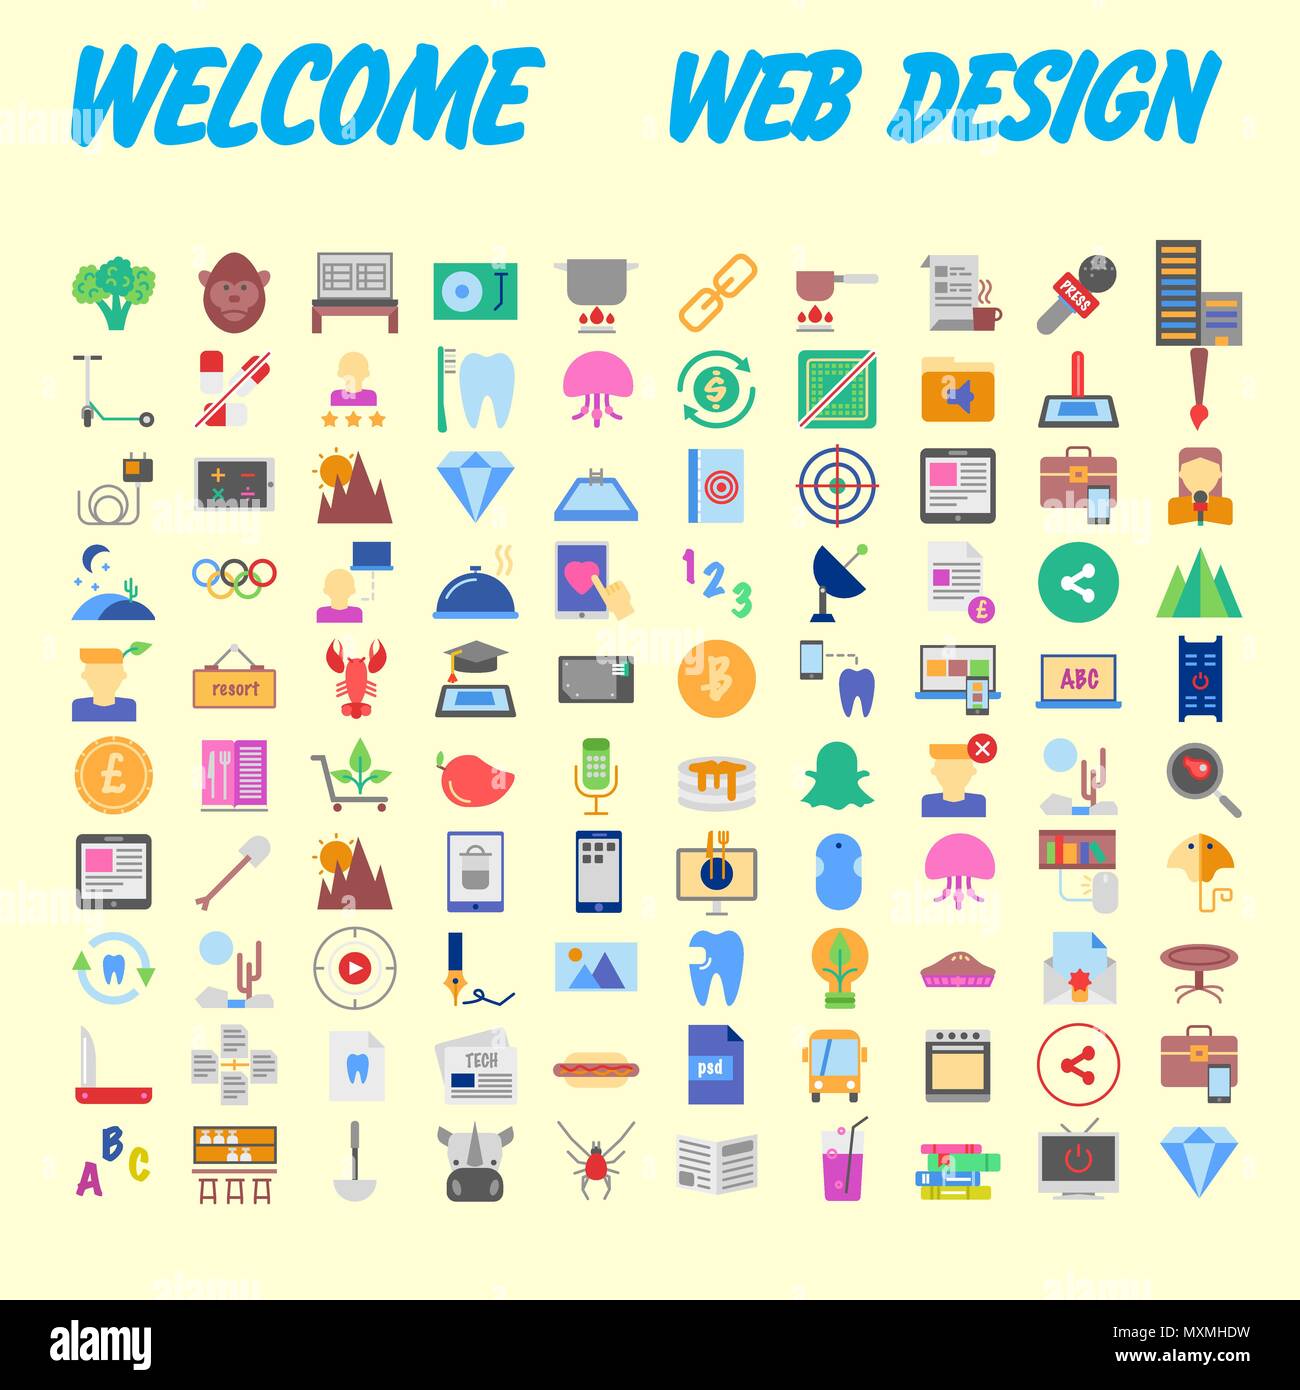 100 universal icons for web design on different topics. Vector illustration Stock Vector